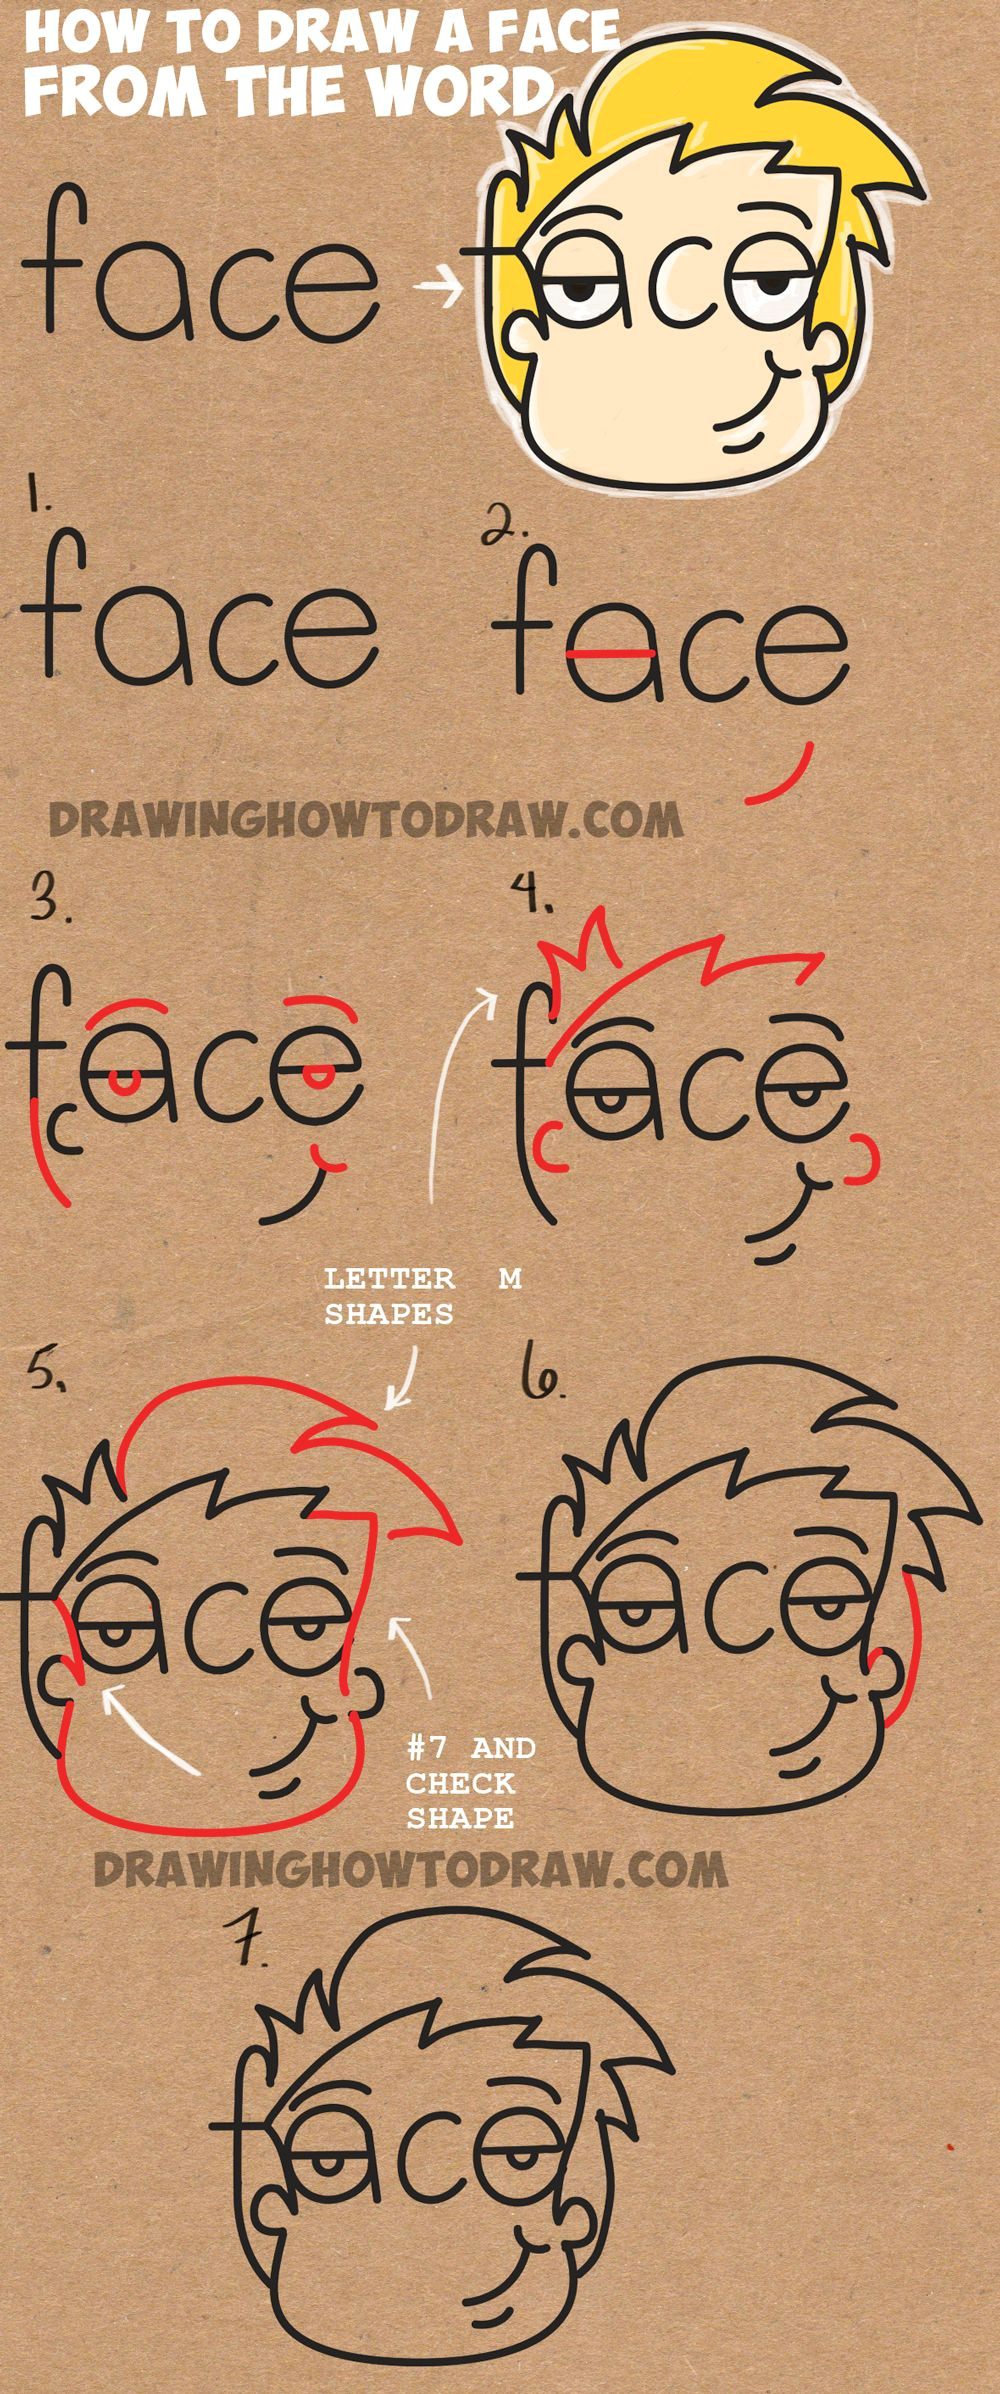 Number 7 Cartoon Drawing How to Draw Cartoon Faces From the Word Face Easy Step by Step